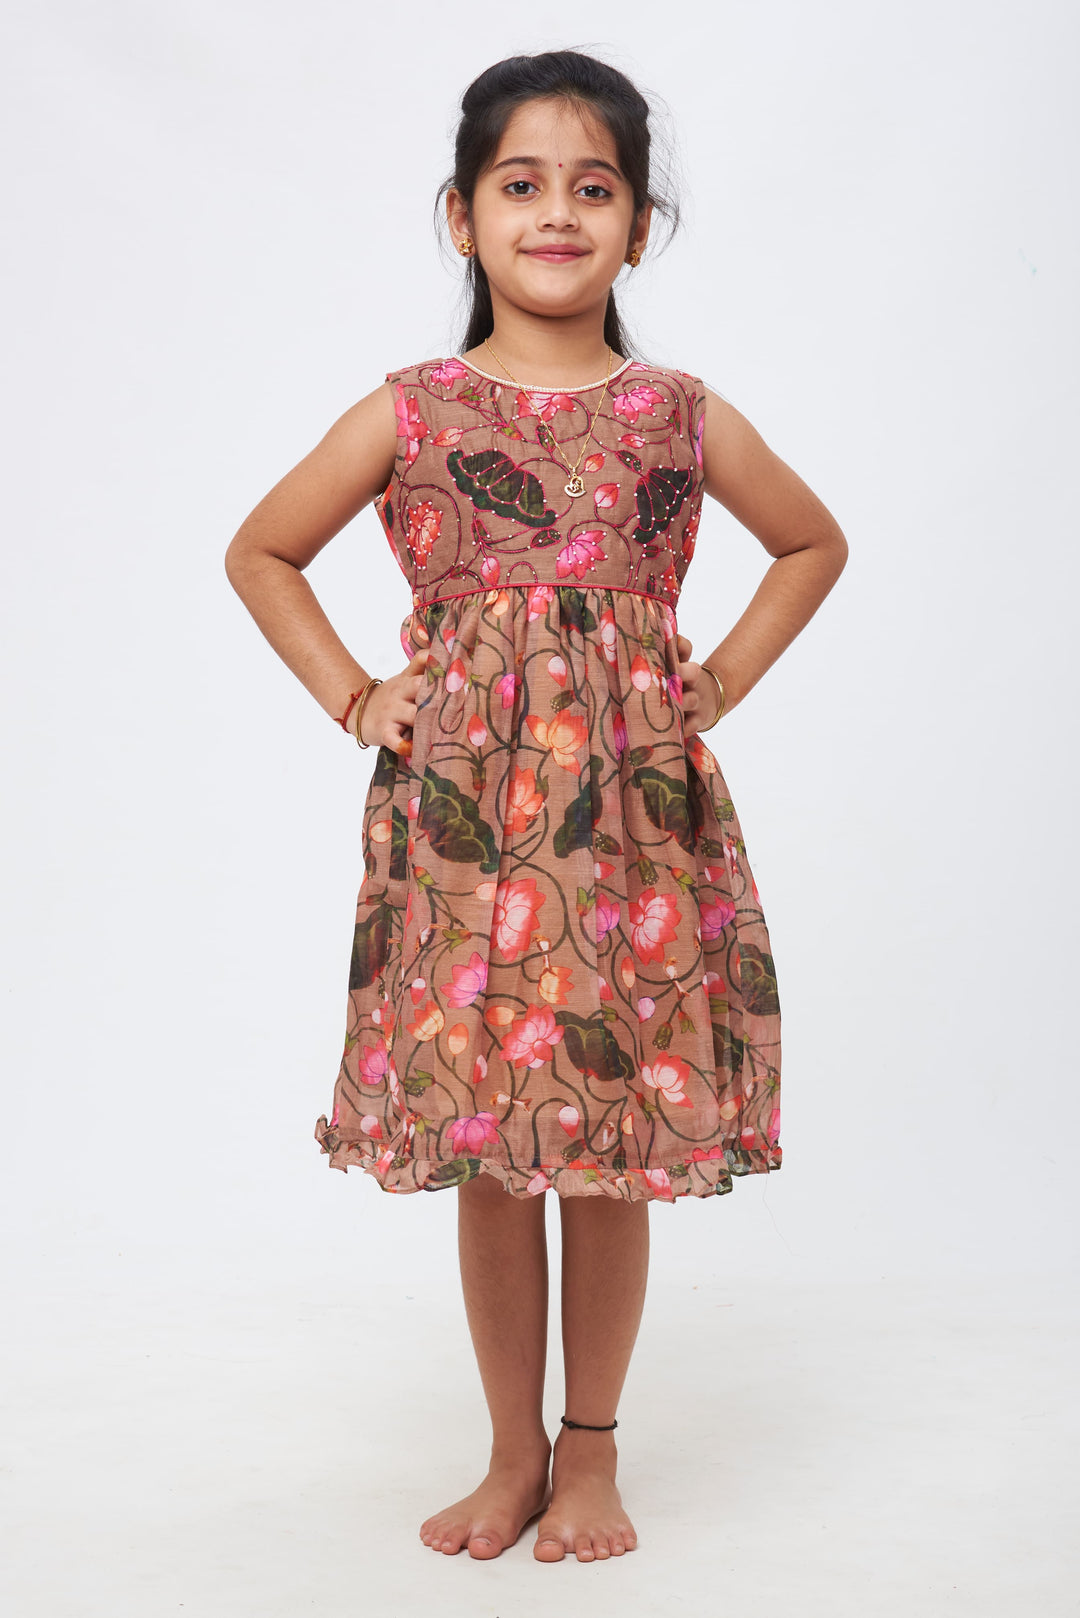 The Nesavu Girls Cotton Frock Enchanted Brown Blossom Tulle Dress - Ethereal Floral Kids Cotton Frock Nesavu 16 (1Y) / Brown / Chanderi GFC1170A-16 Everyday Elegance for Her | Girls Daily Wear Cotton Frocks | The Nesavu